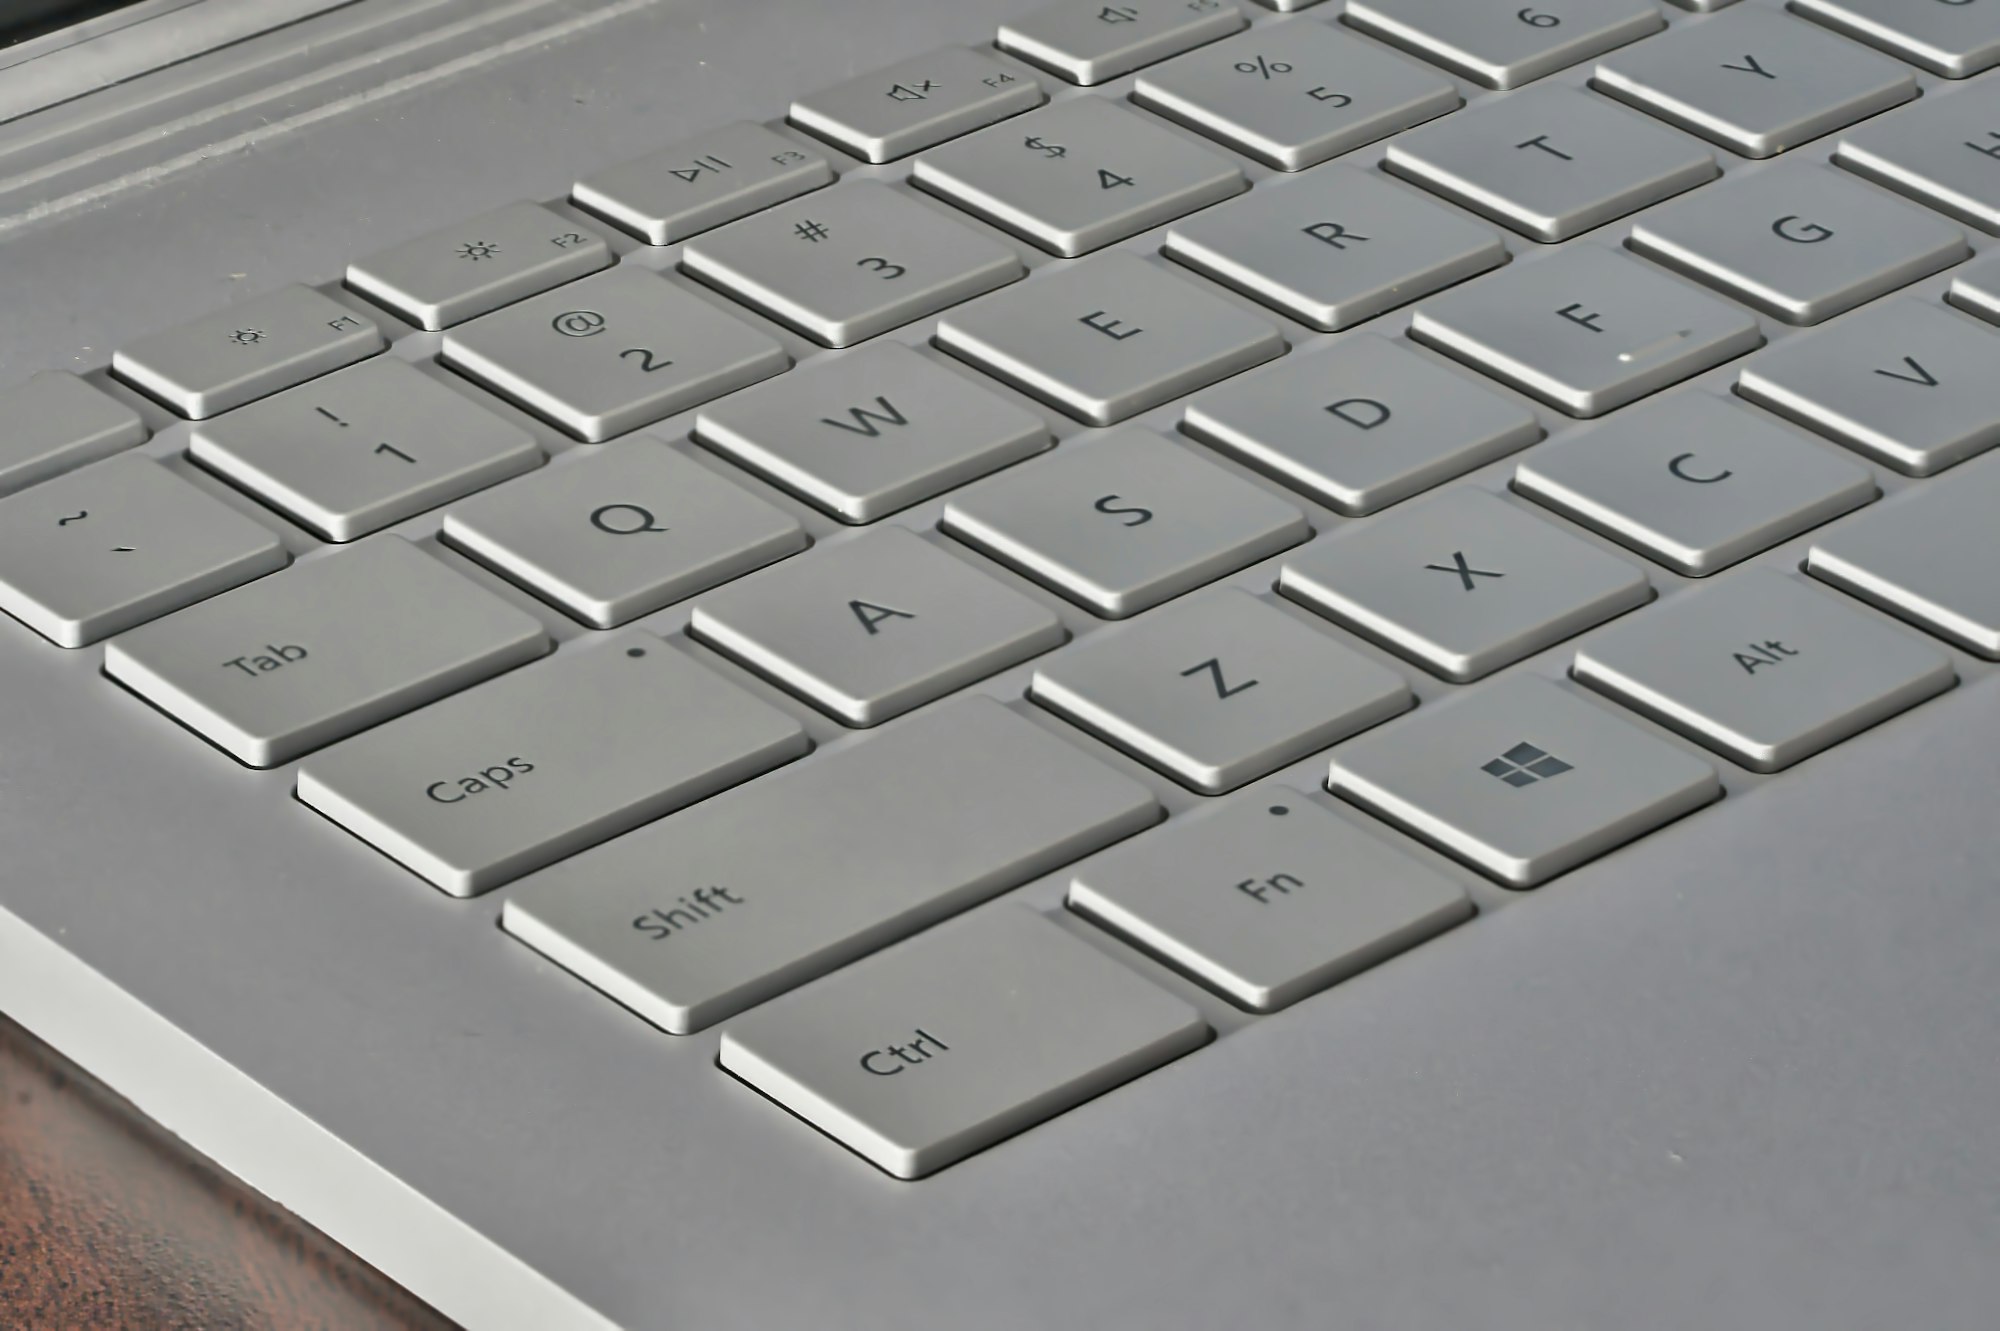 How to Change Key Function of Fn Key in Windows 10 and 11